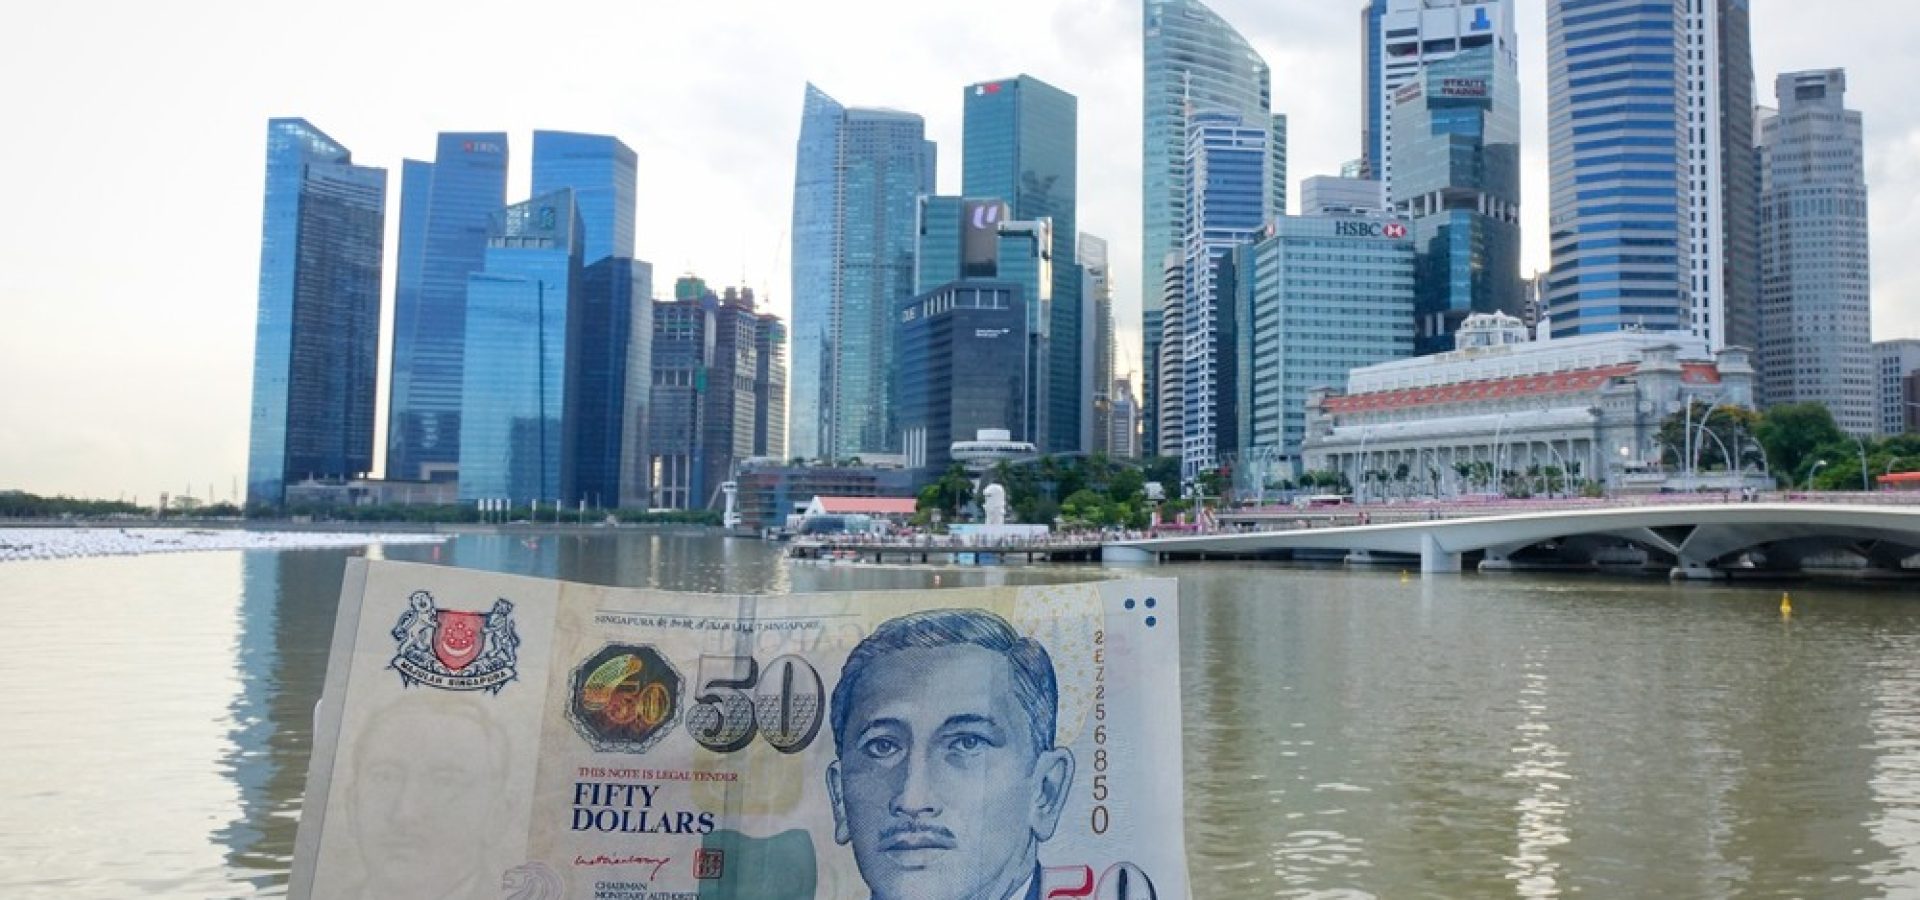 Wibest – Monetary Authority of Singapore: Singaporean dollar in held by a man and a city in the background.